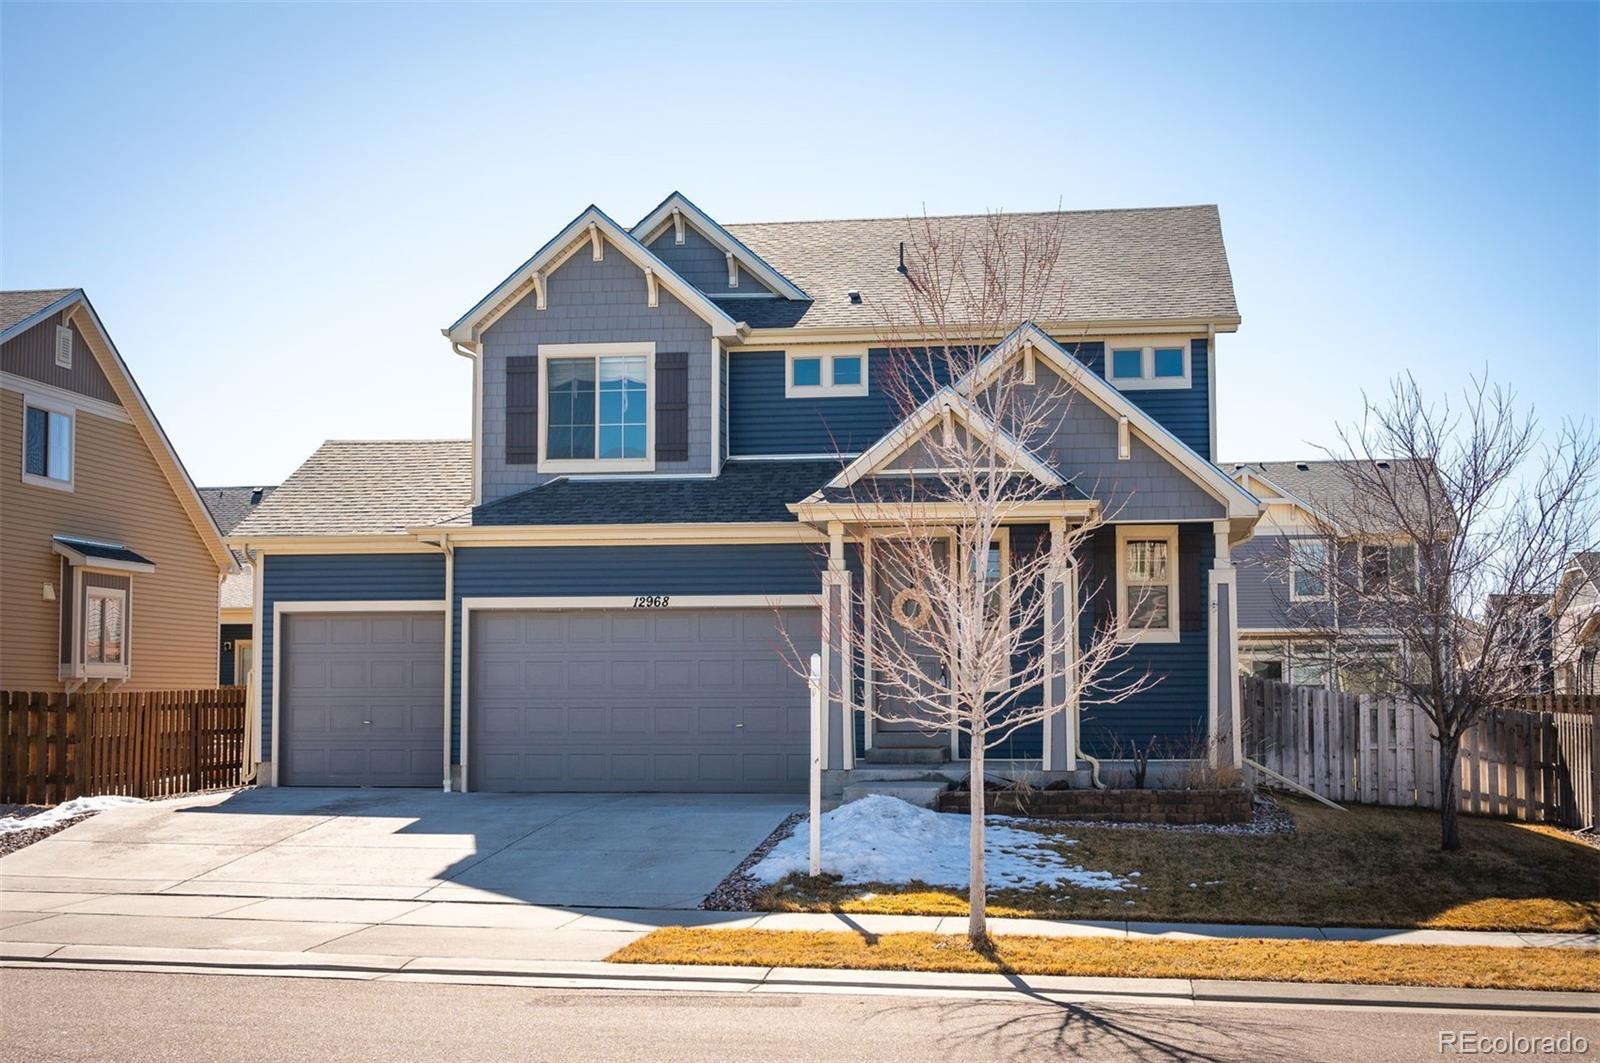 12968 E 108th Place, commerce city MLS: 7686481 Beds: 4 Baths: 4 Price: $599,000